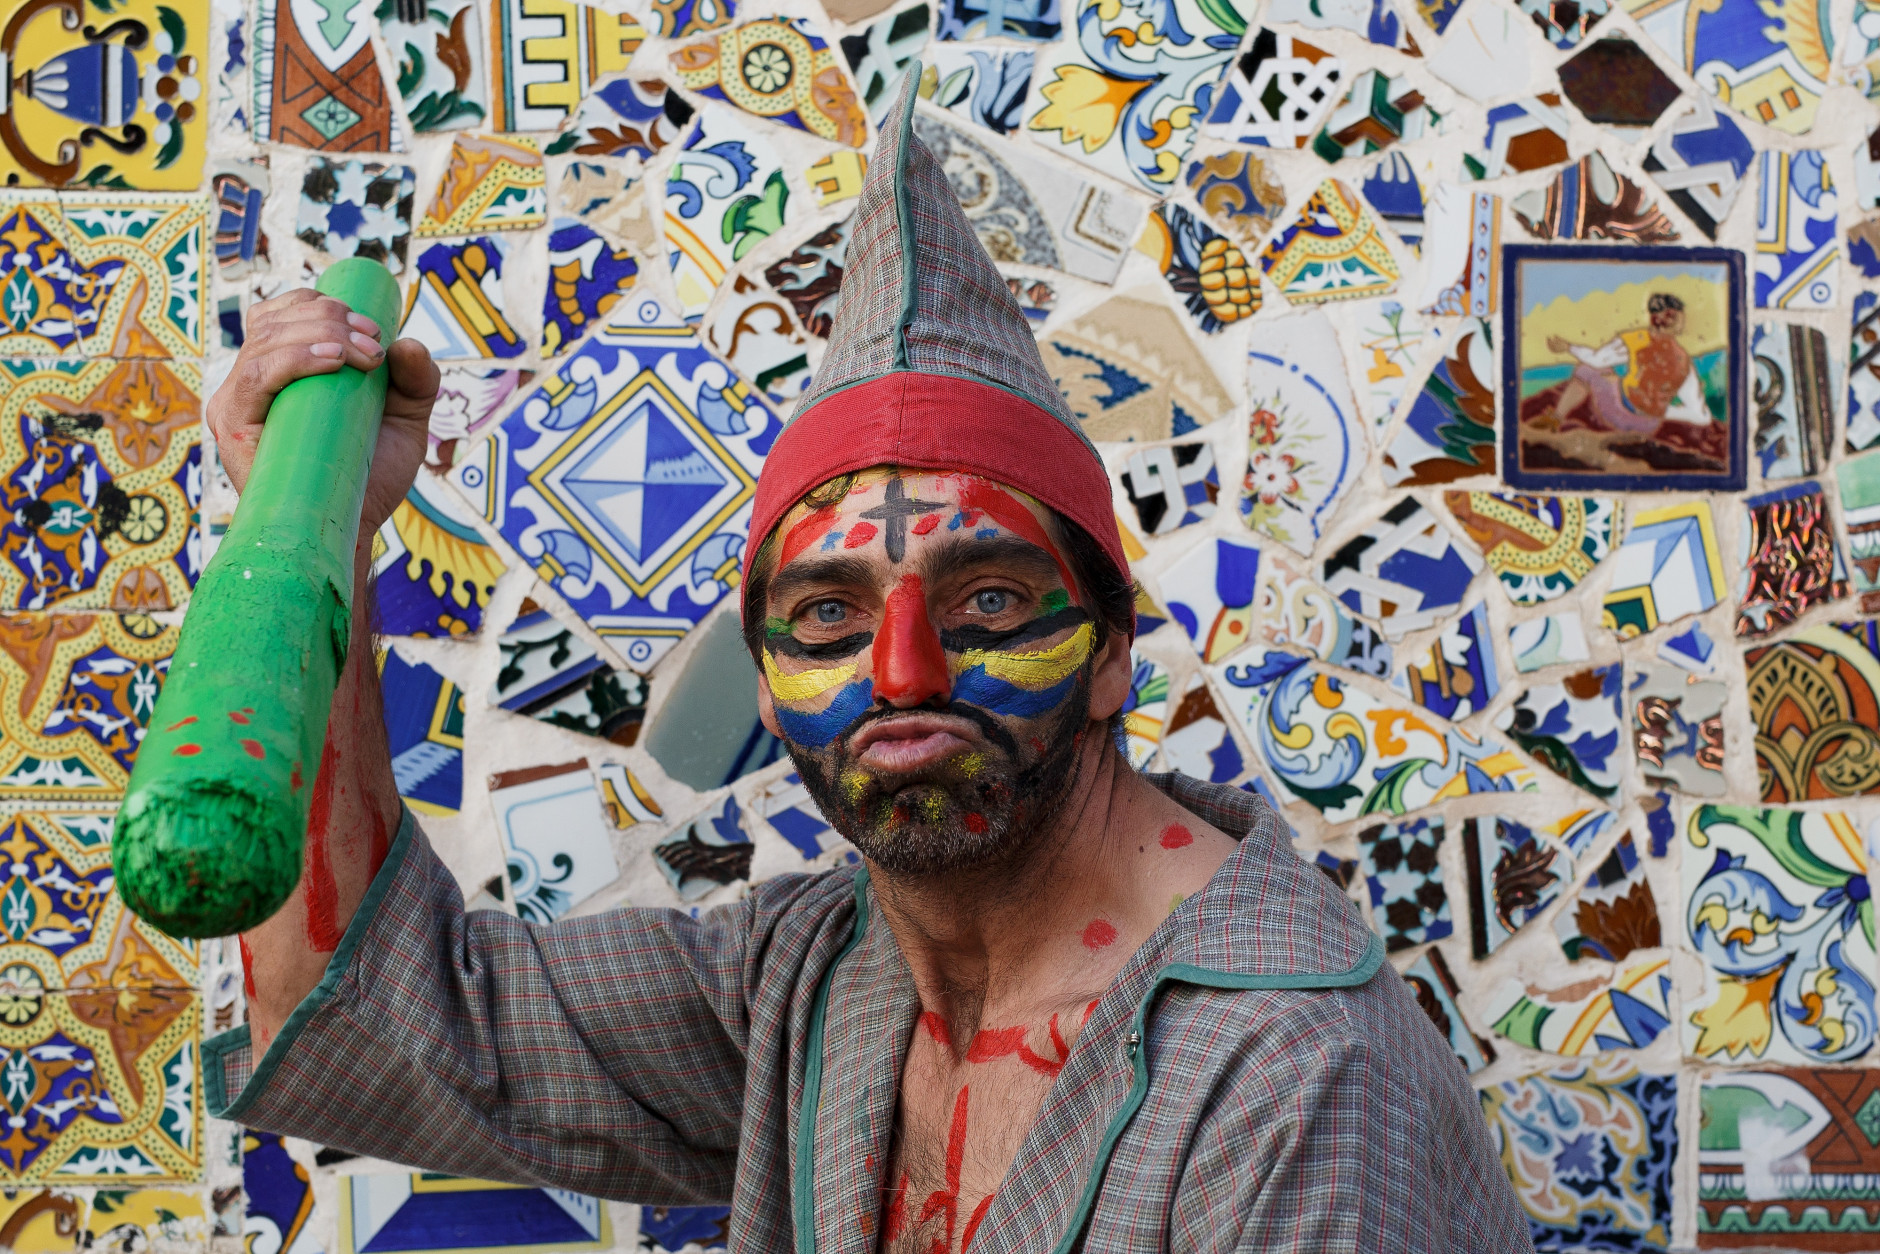 An actor representing a 'Judio' poses for a portrait before taking part in 'La Judea' during a Holy Friday procession on March 25, 2016 in Cuevas del Almanzora, in Almeria province, Spain. Certain families of Cuevas del Almanzora have kept this tradition alive for more than a hundred years. Men wearing costume hold a wood maze representing 'los Judios' (the Jewish) pretend to beat and pullÊ 'El Senor' who represents Jesus Christ around the village as he holds a cross on his back. Spain celebrates holy week before Easter with processions in most Spanish towns and villages. (Photo by Pablo Blazquez Dominguez/Getty Images)